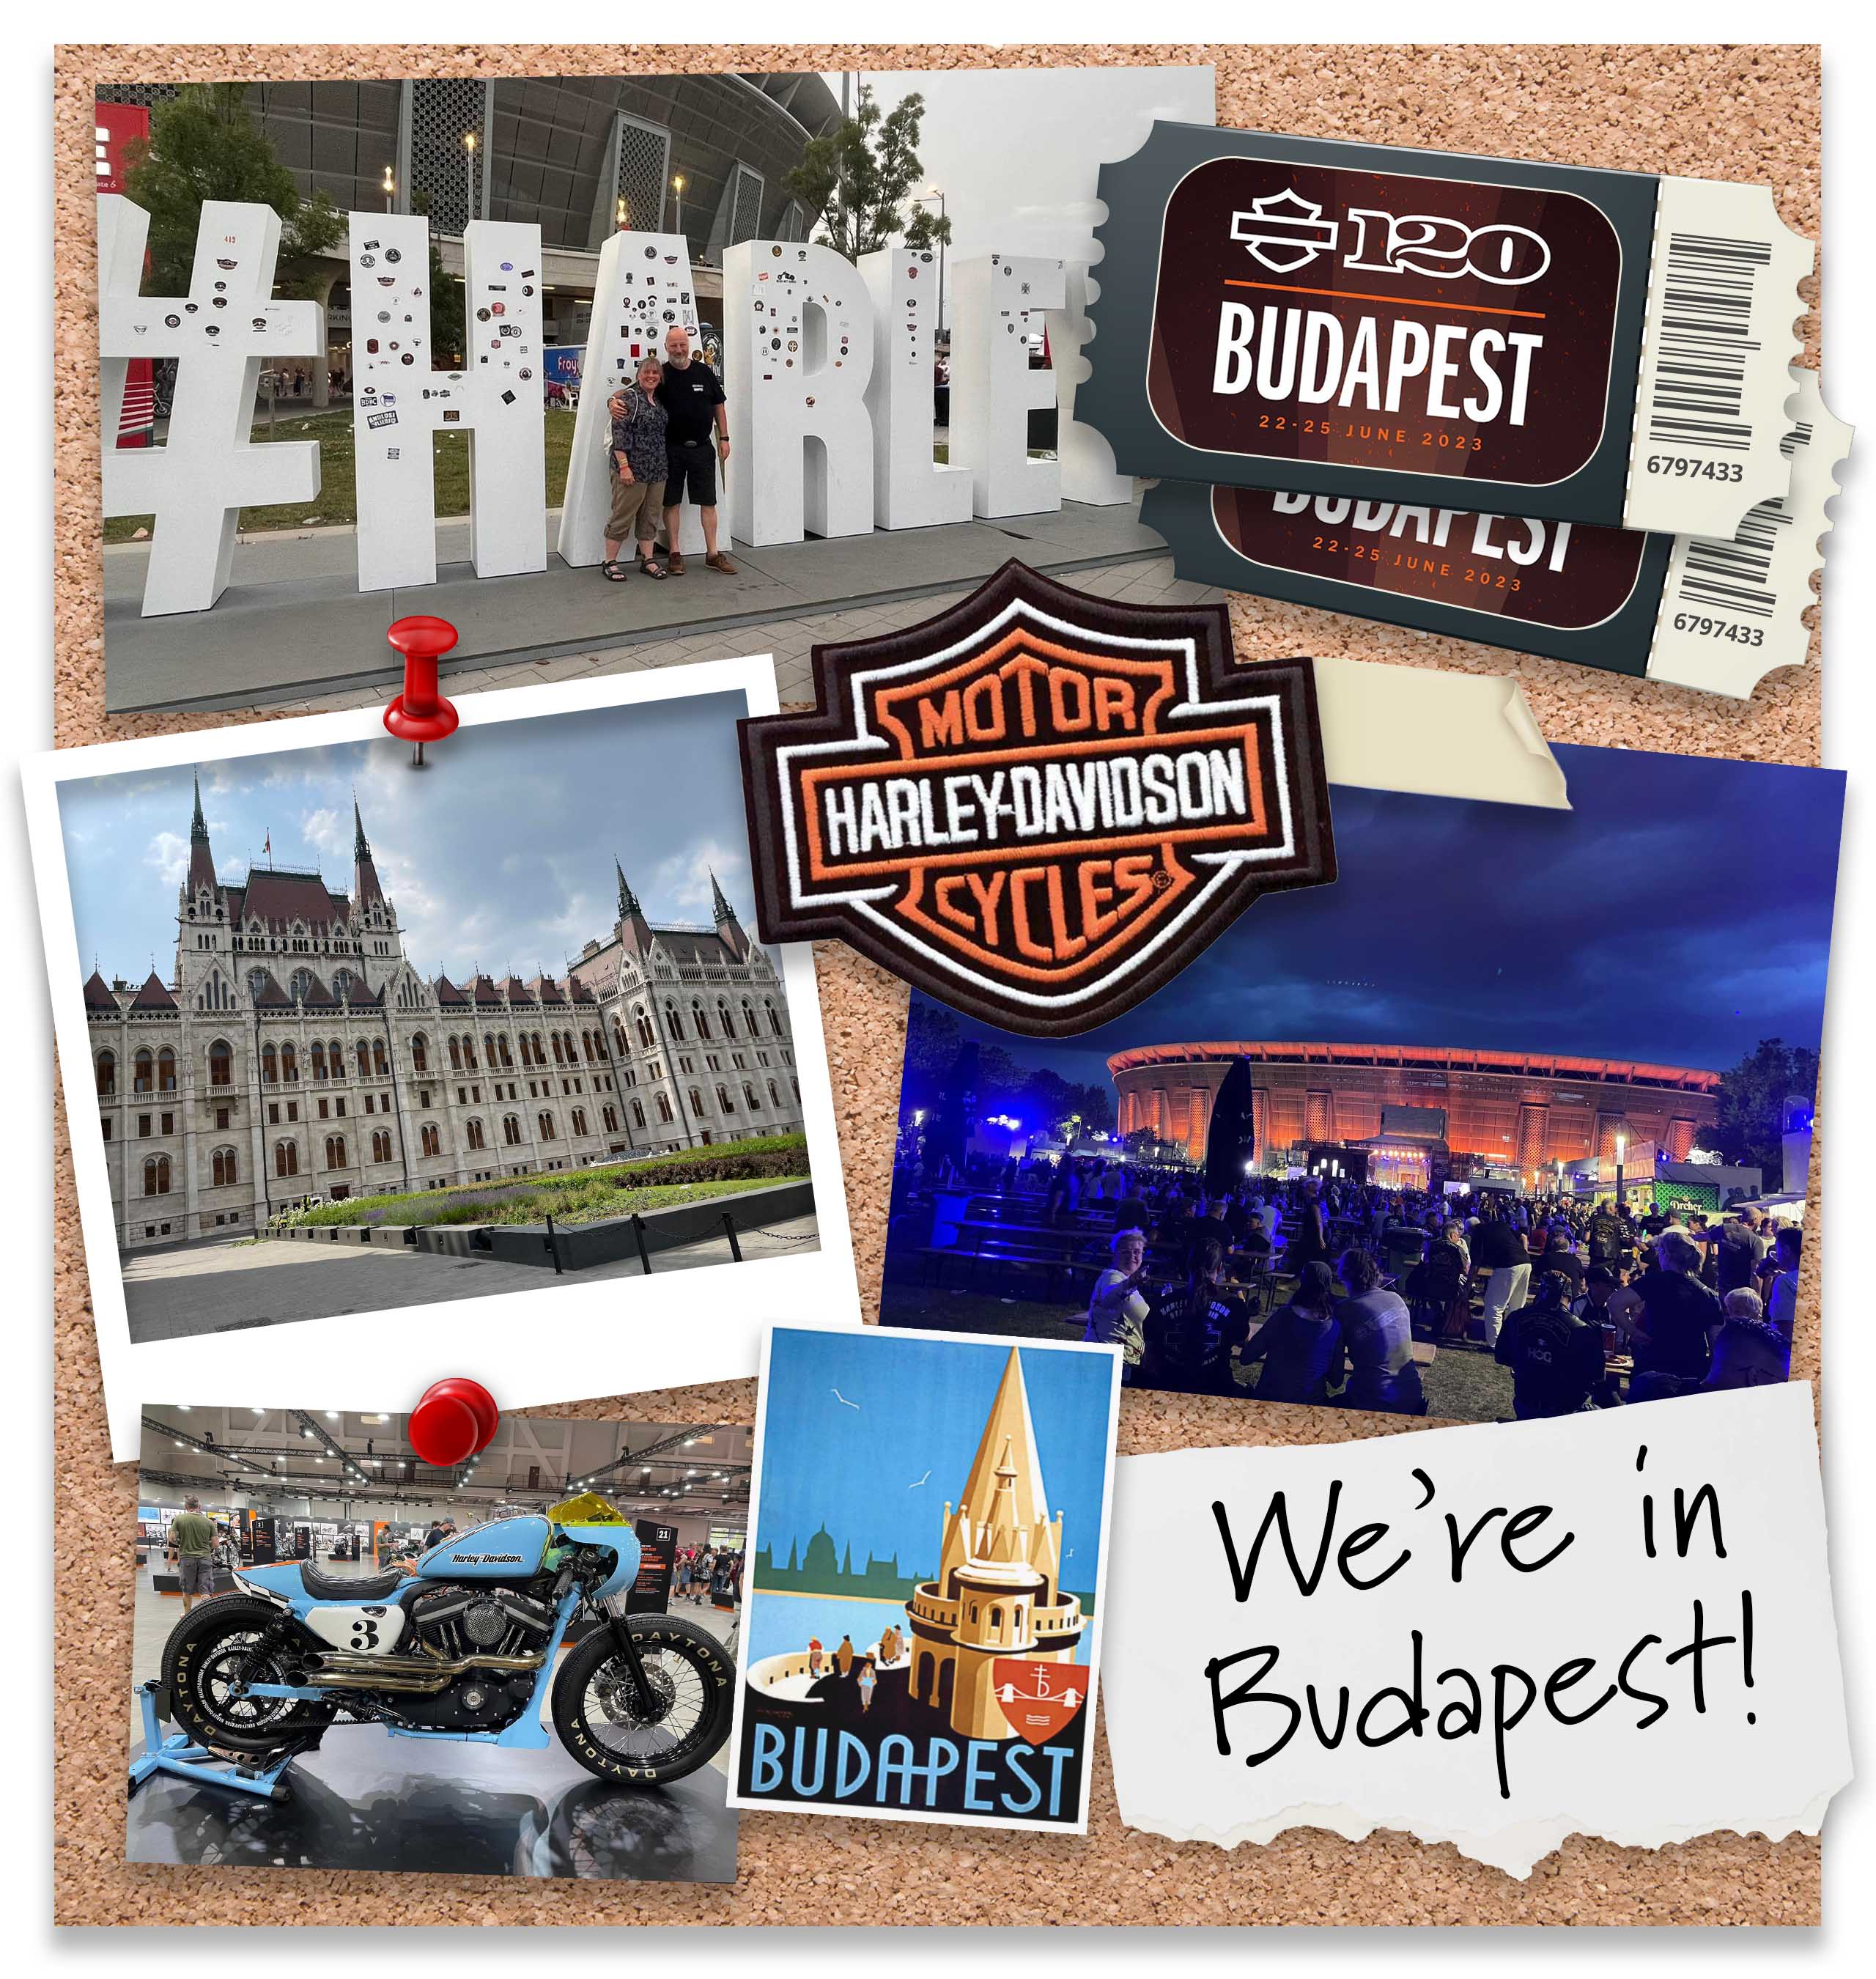 Mel's road trip from Maidstone Harley-Davidson to Budapest